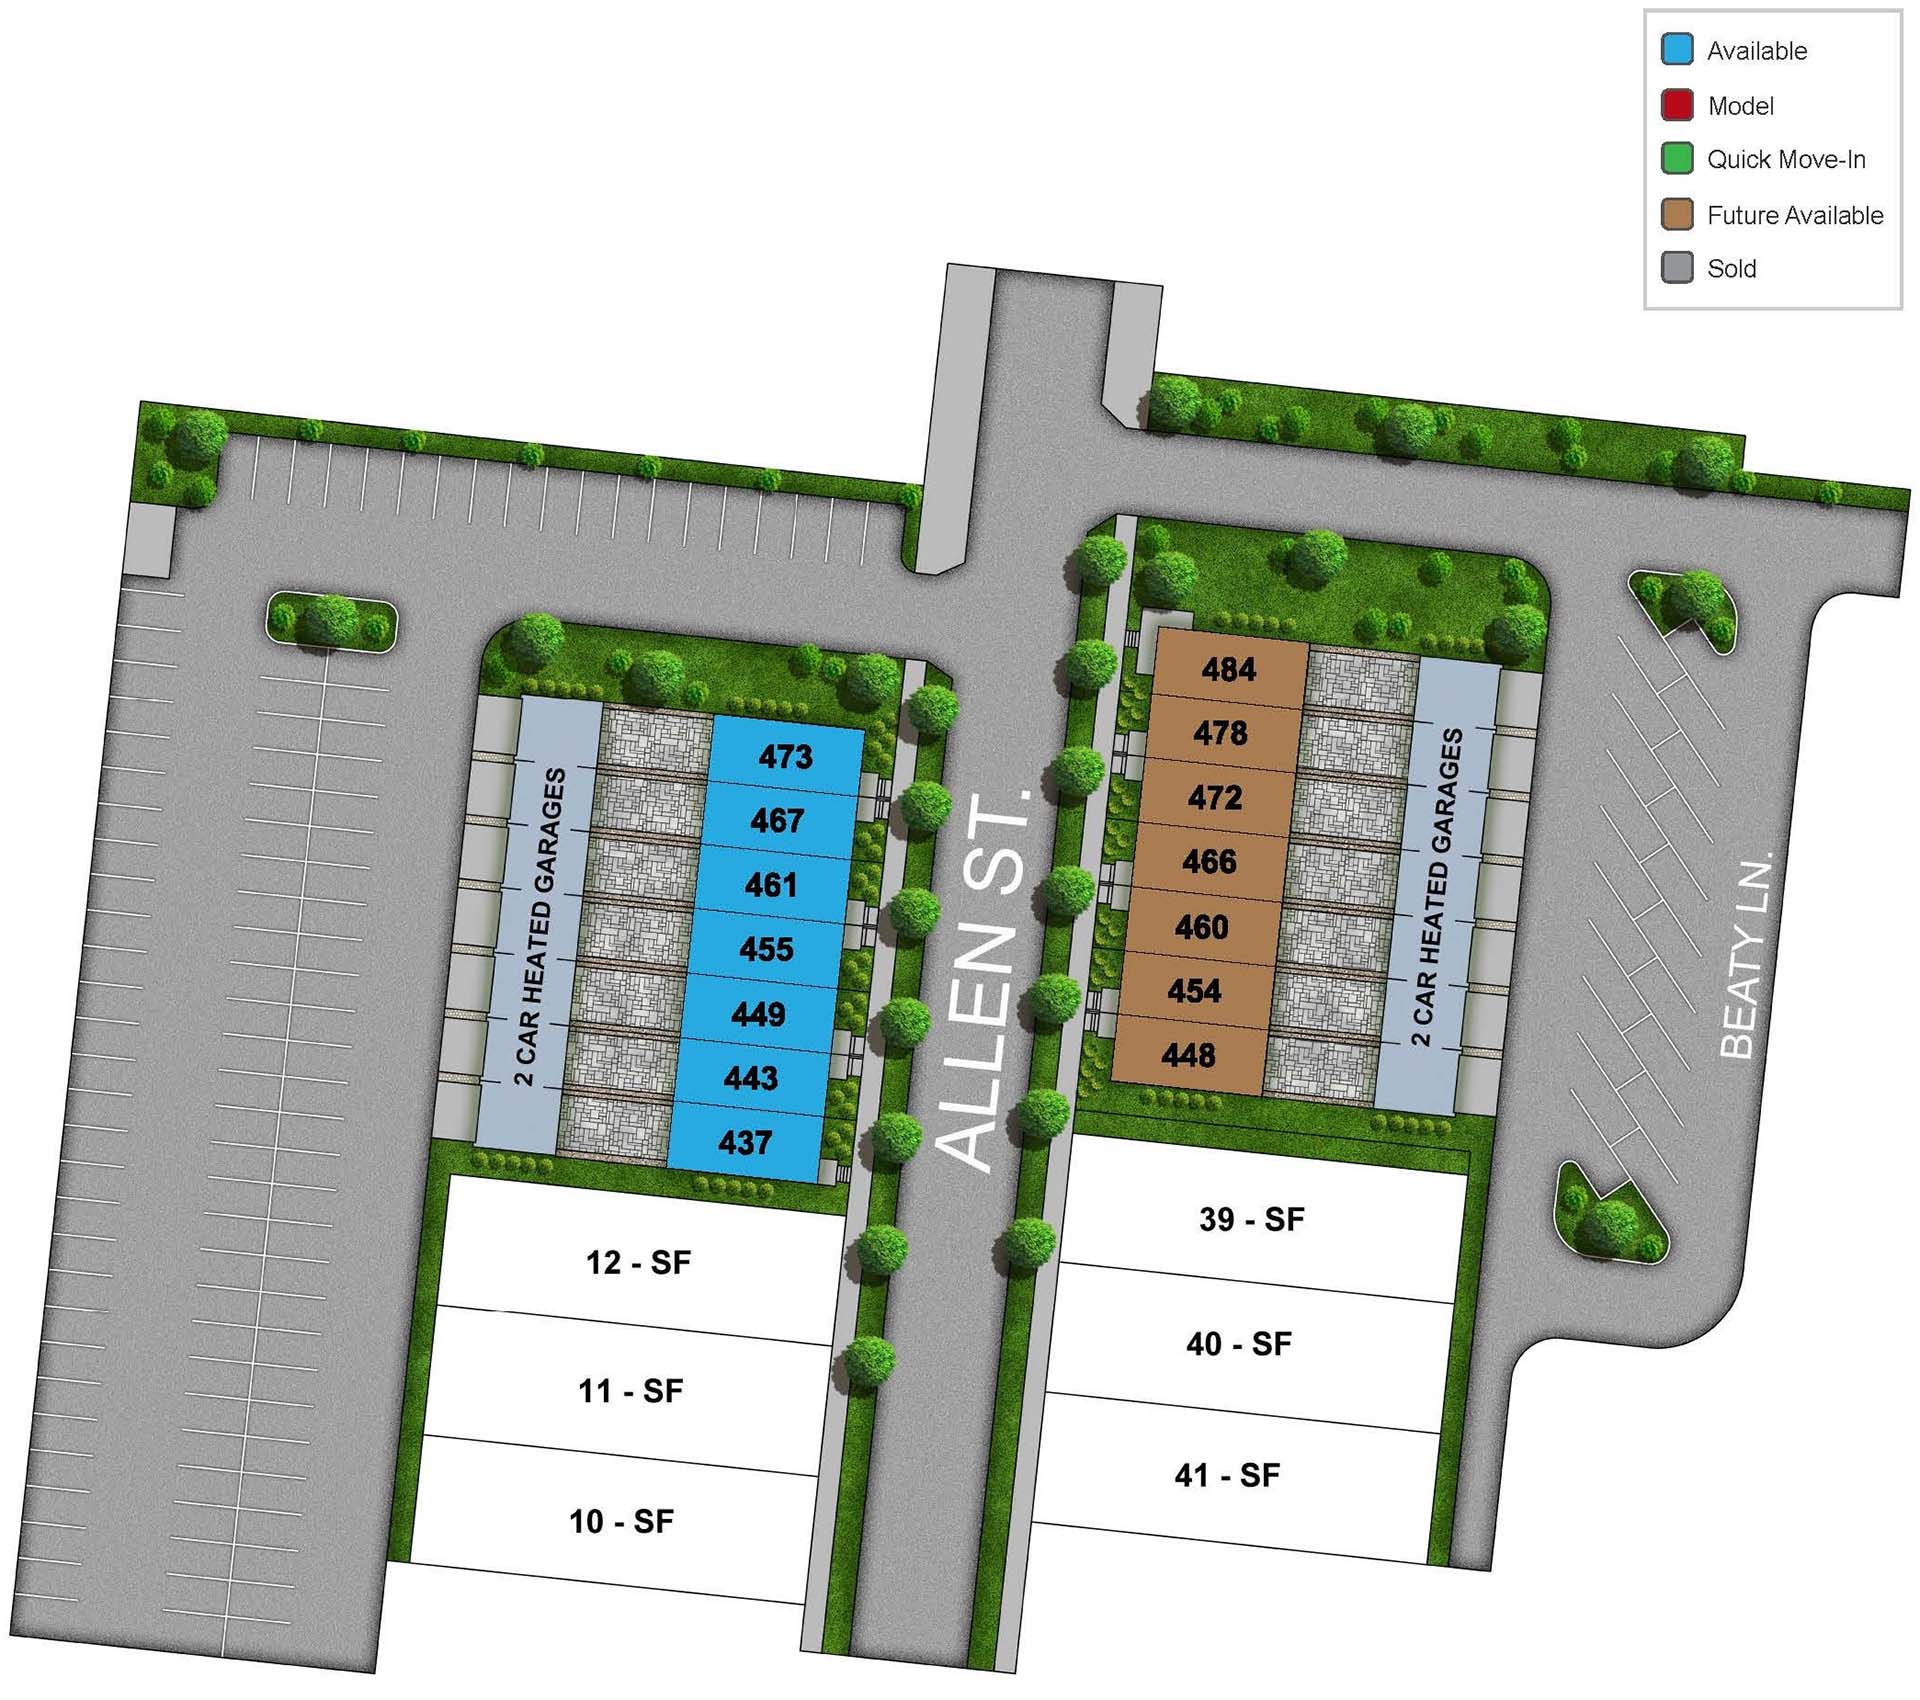 The Townes at Union Village site map